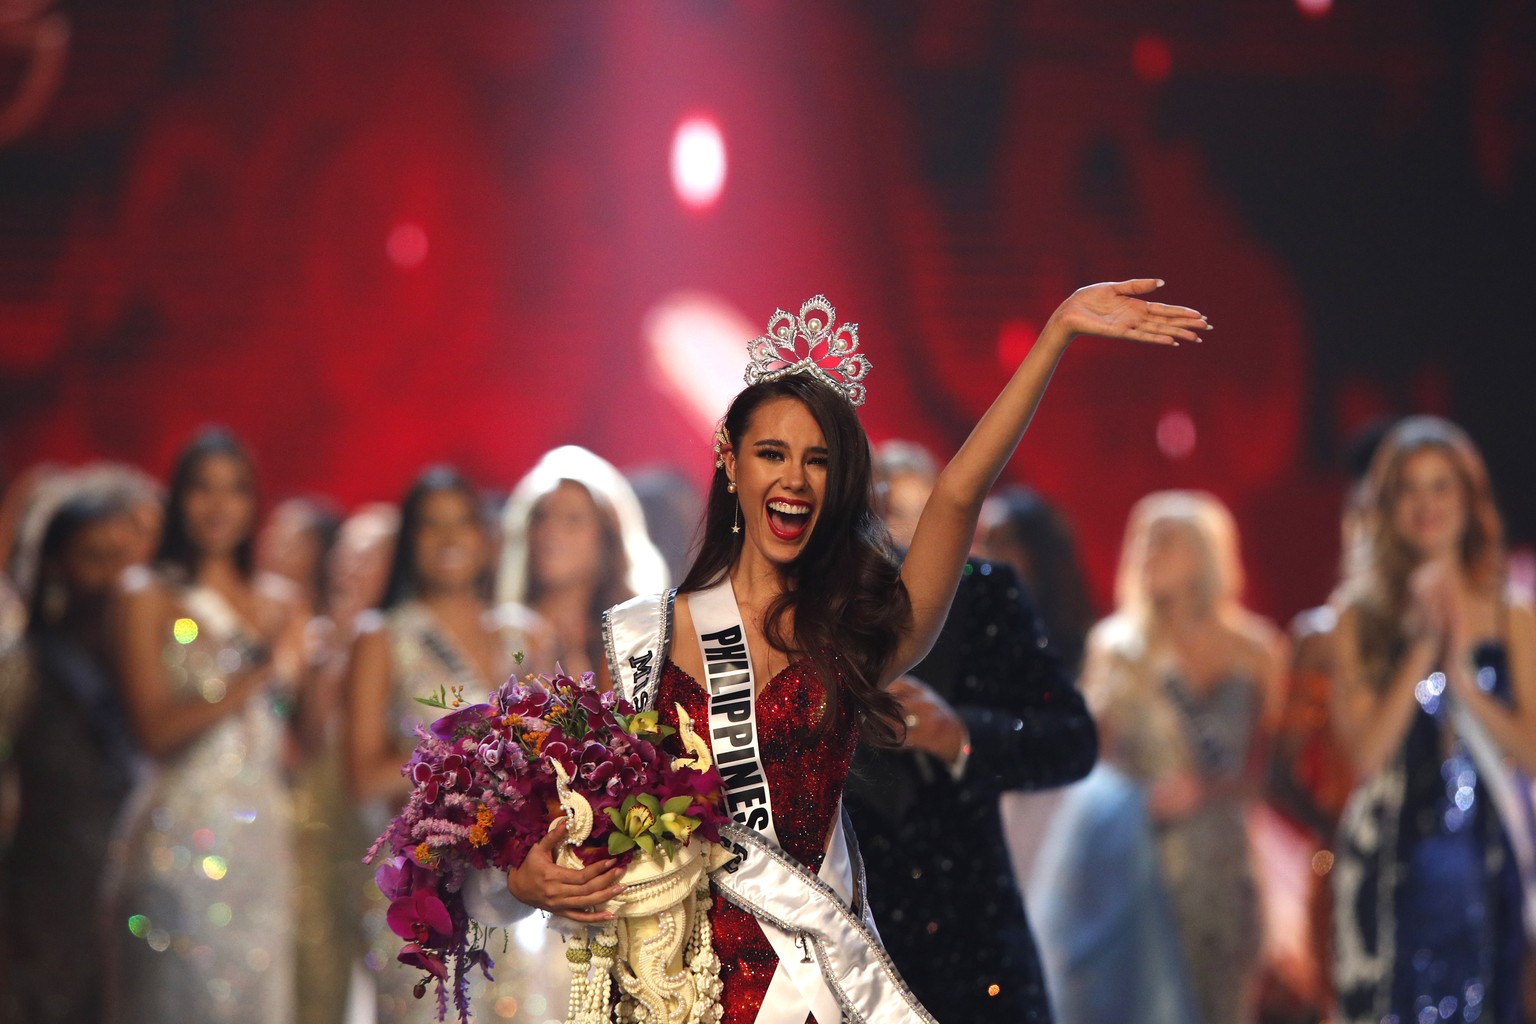 epa07236457 The new Miss Universe 2018 Catriona Gray of the Philippines jubilates after being crowned during the Miss Universe 2018 beauty pageant at Impact Arena in Bangkok, Thailand, 17 December 201 ...